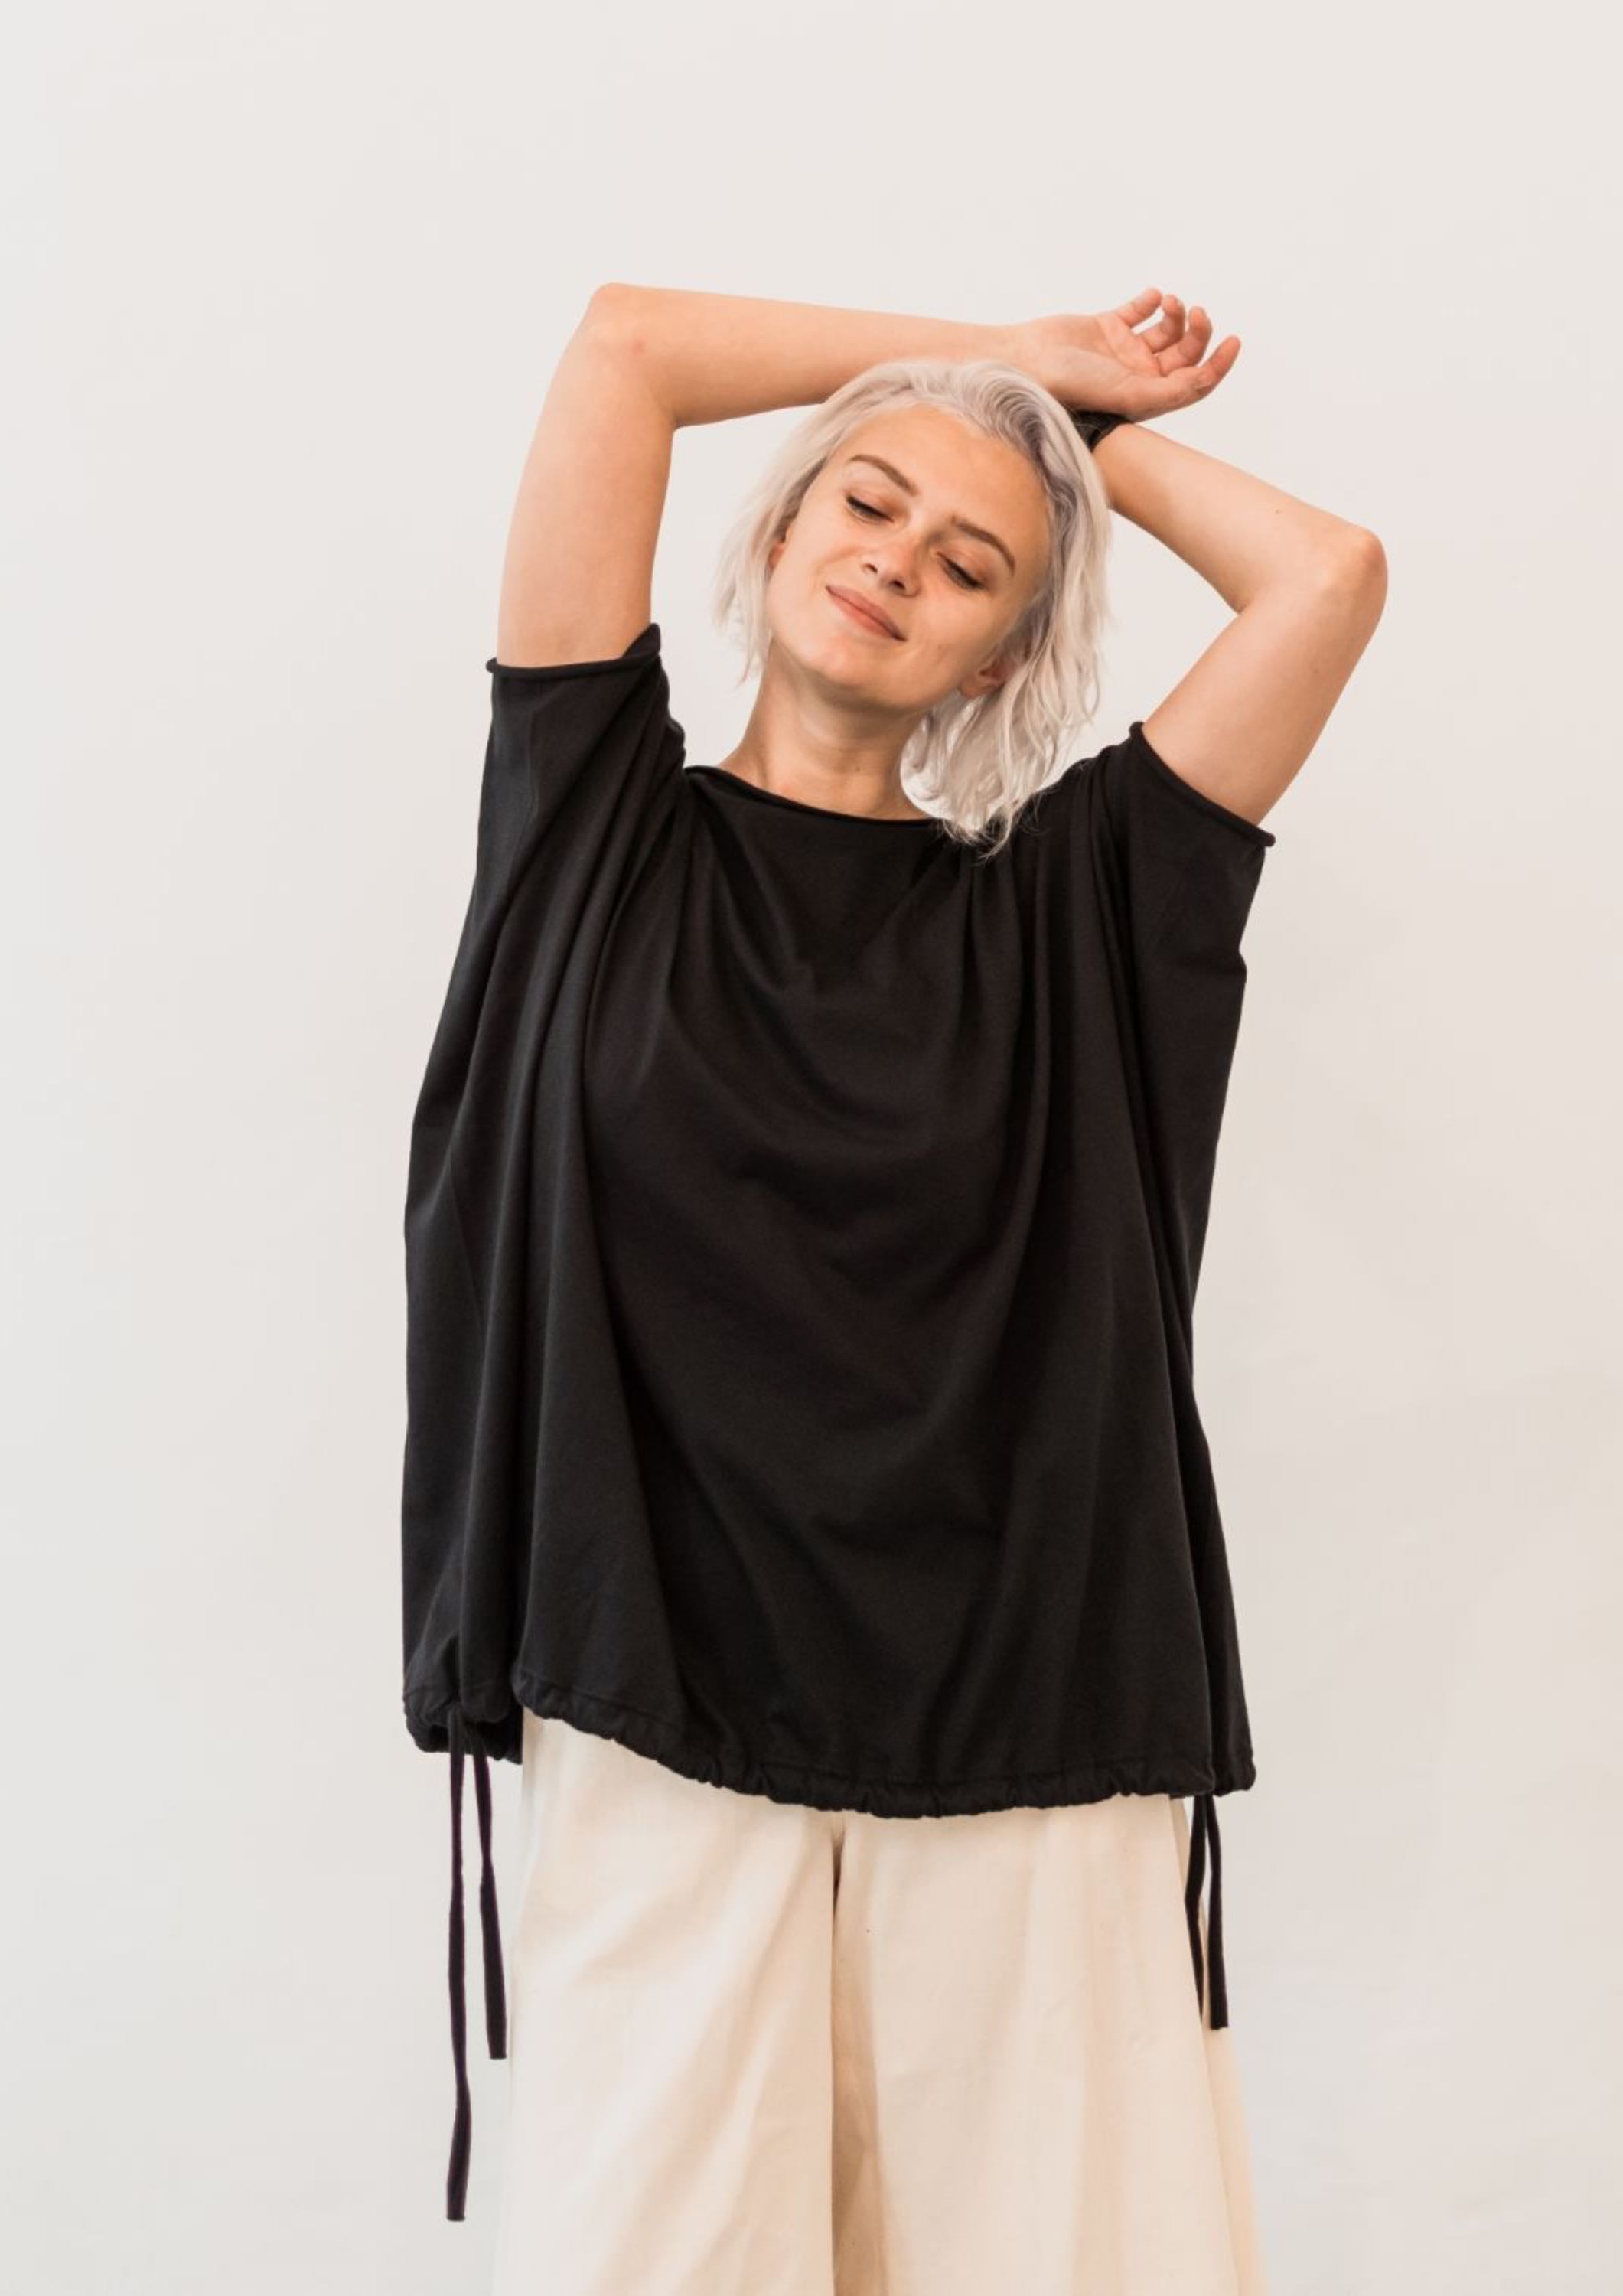 Multifunctional black fluid jersey, made from 100% organic cotton. Can be worn as a blouse, vest or poncho. With two sided adjustable drawn strings. 